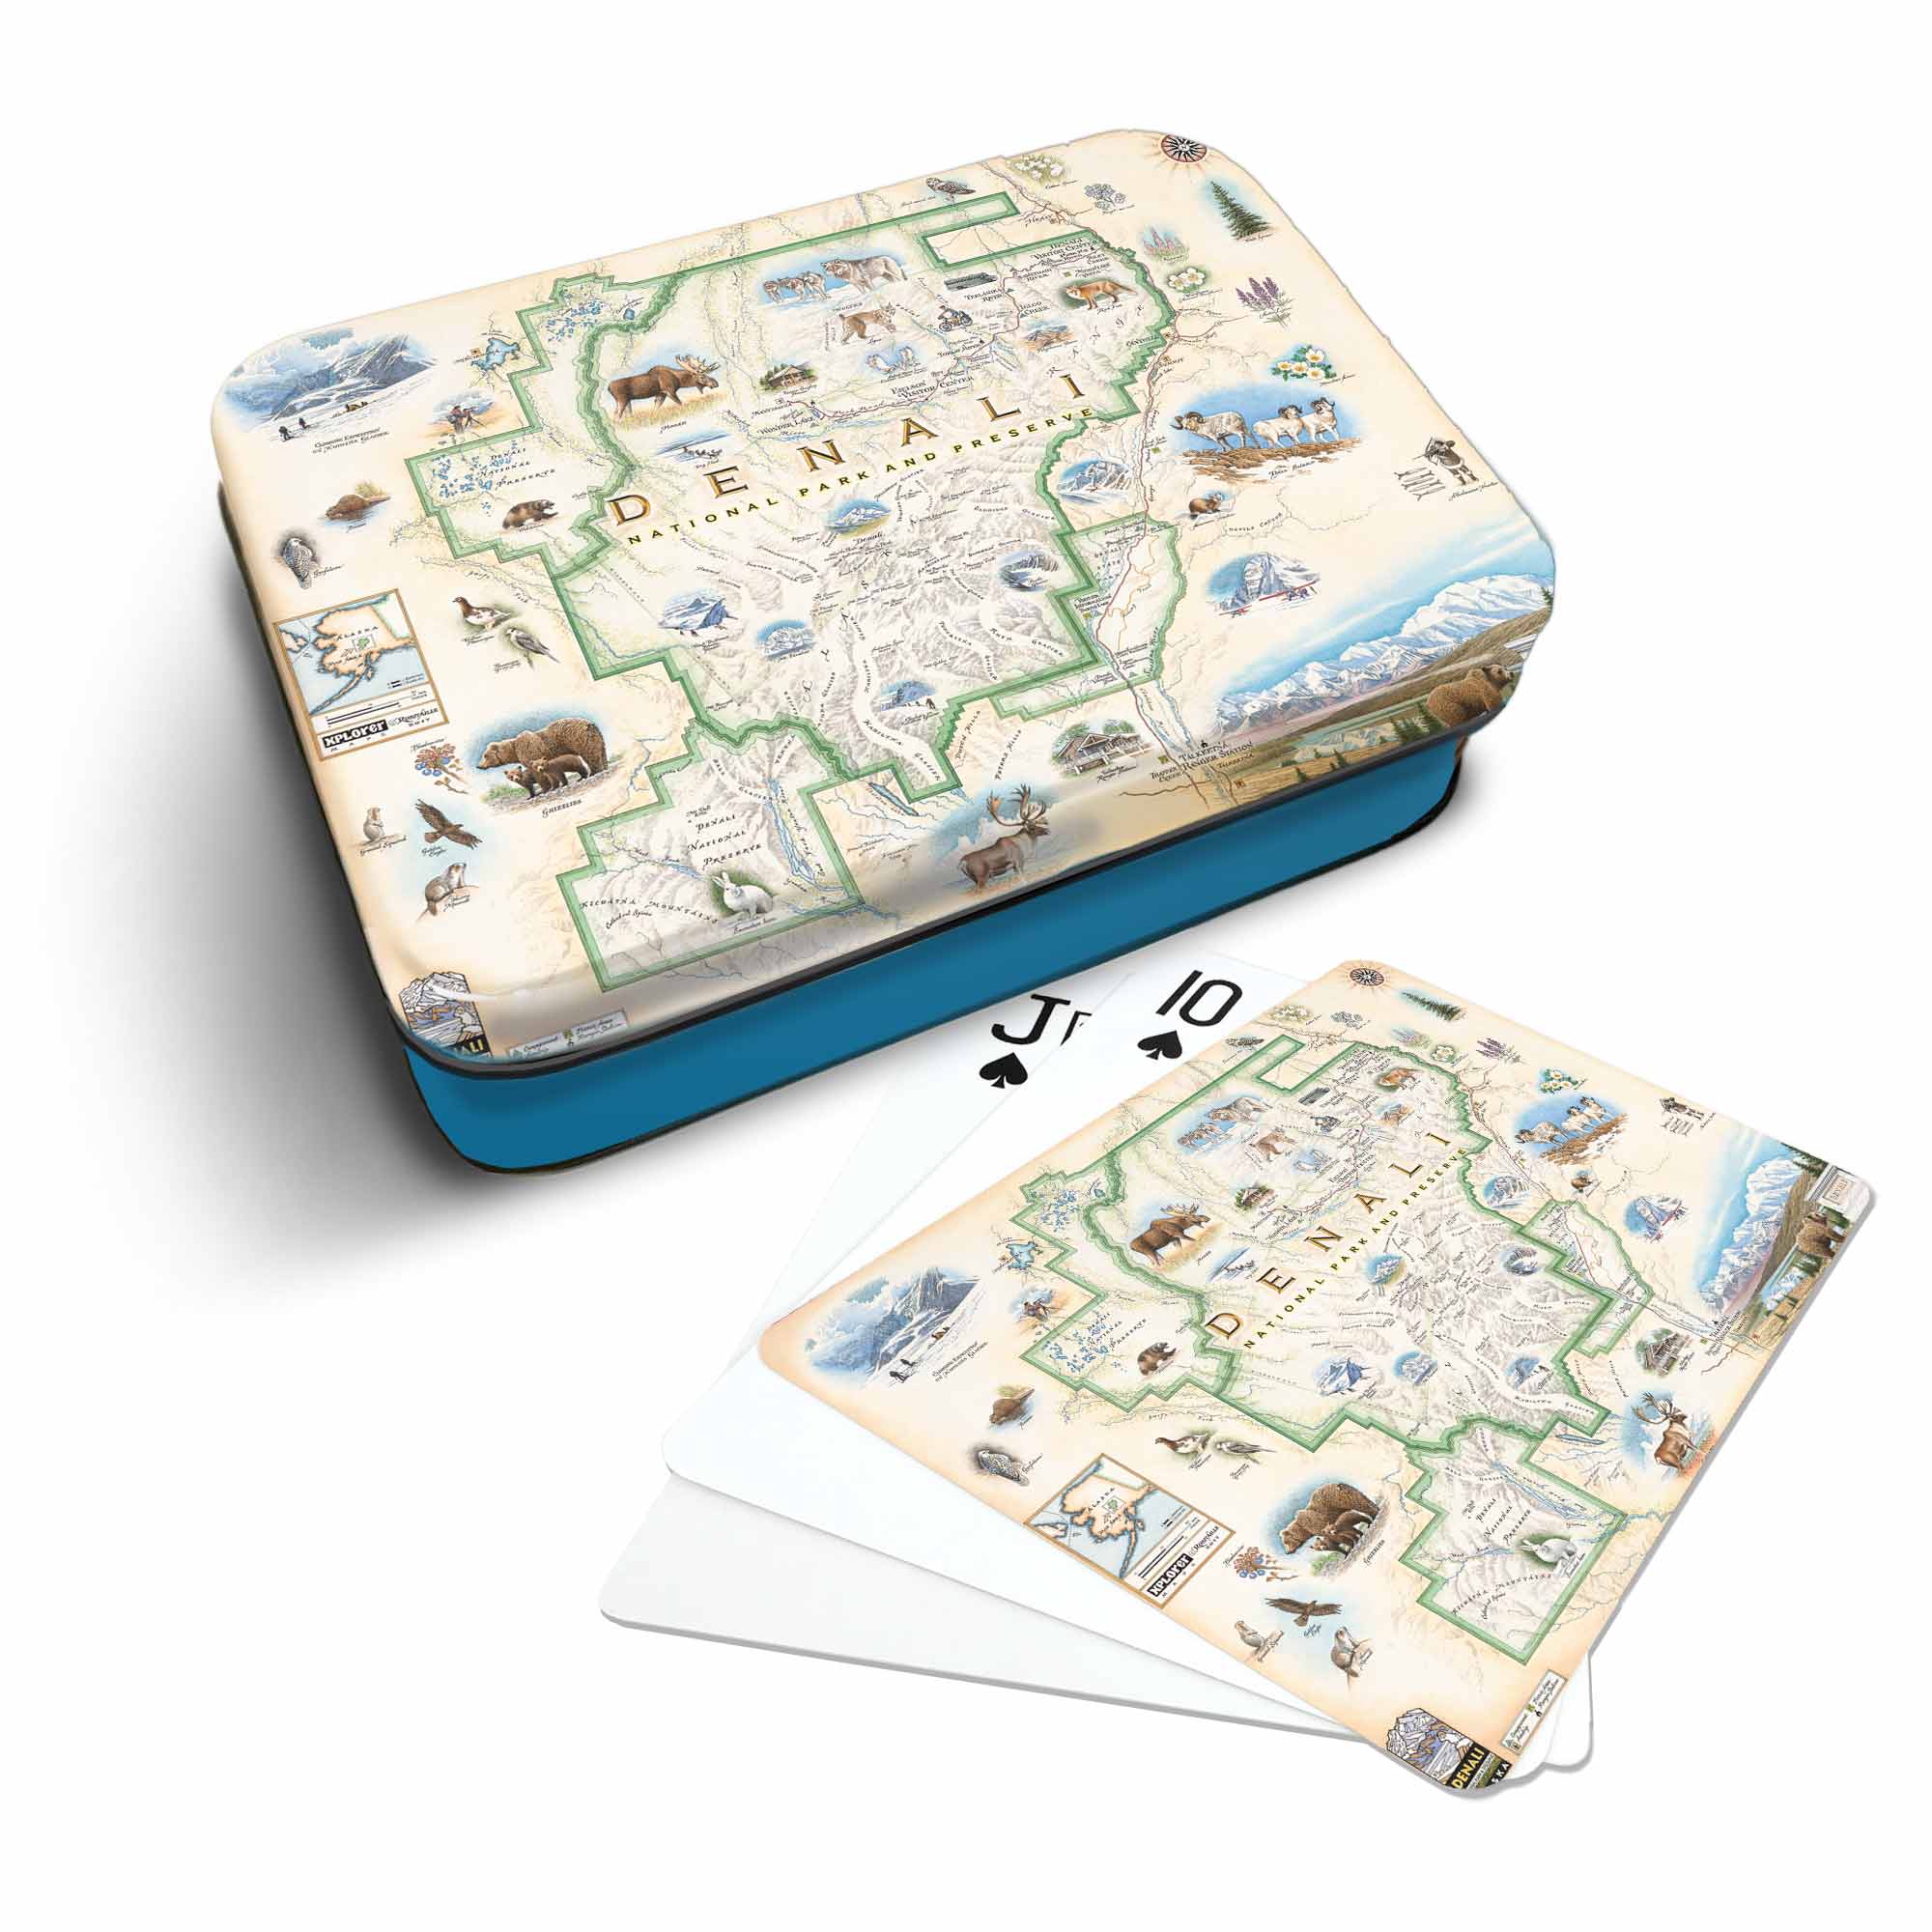 Denali National Park Map Playing cards that features iconic attractions, flora and fauna of that area - Blue Metal Tin